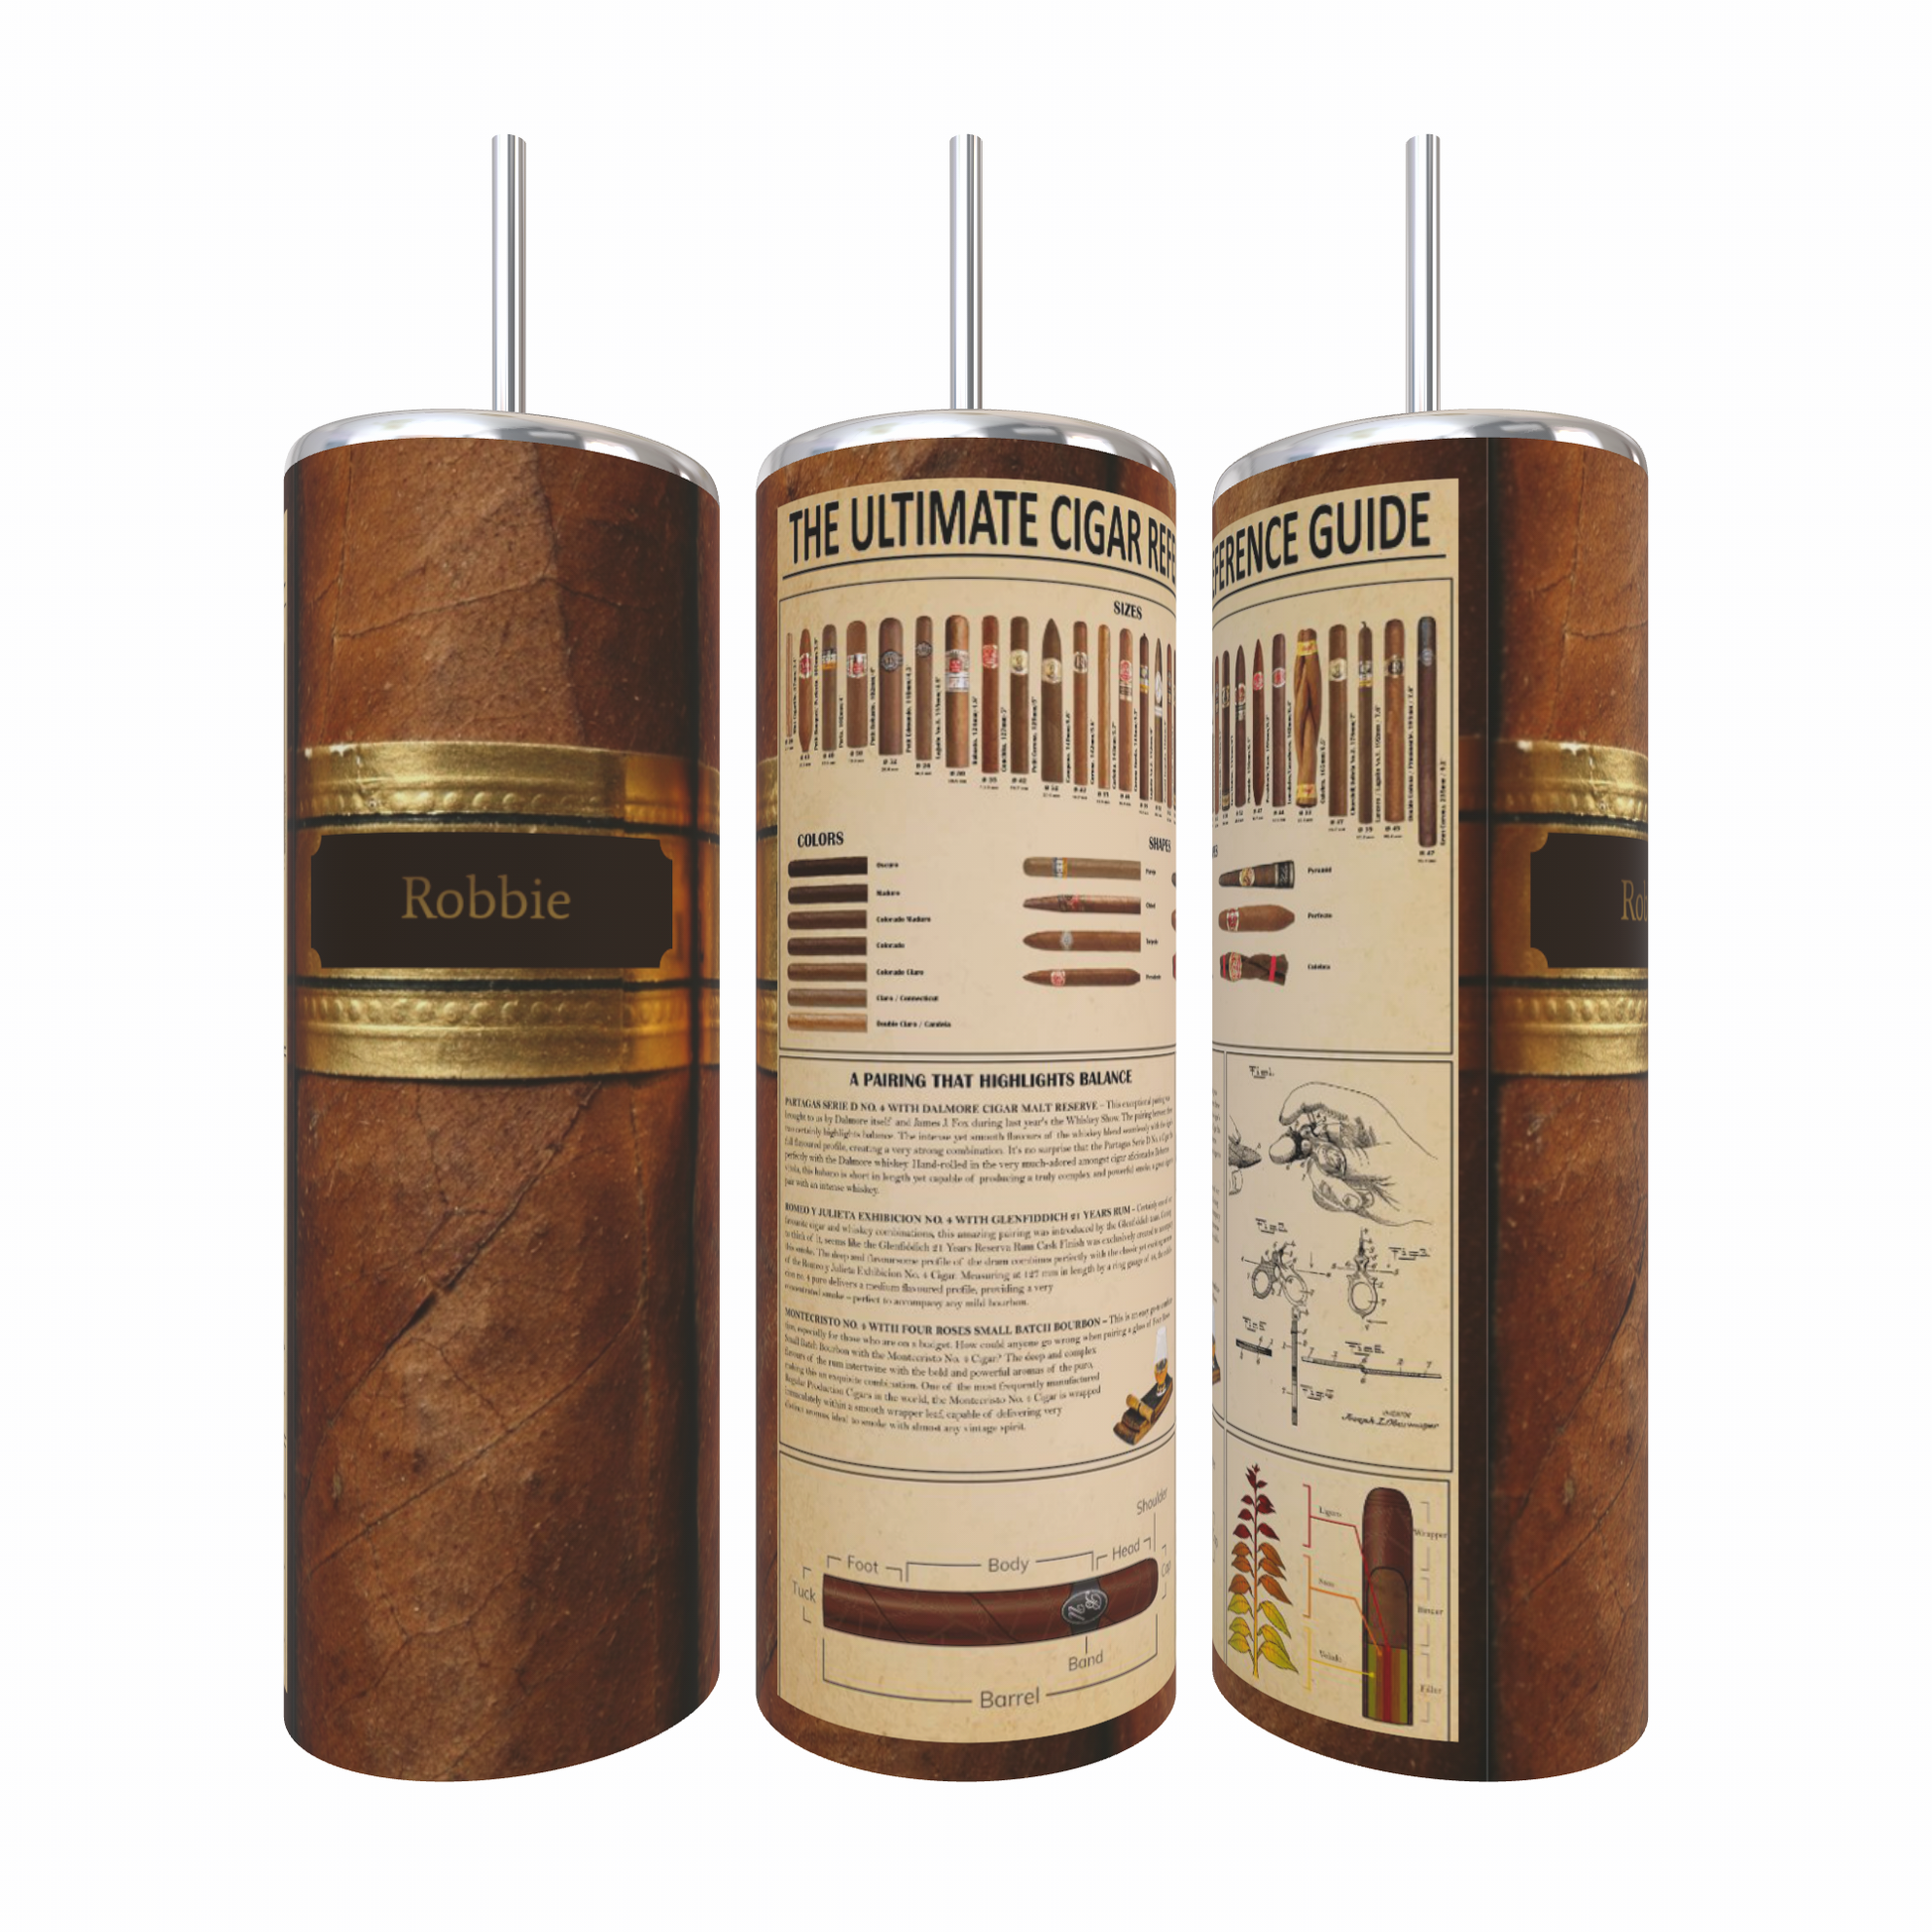 Cigar themed tumbler cup. Looks like a cigar wrap with reference guide on one side. Customized with a name.